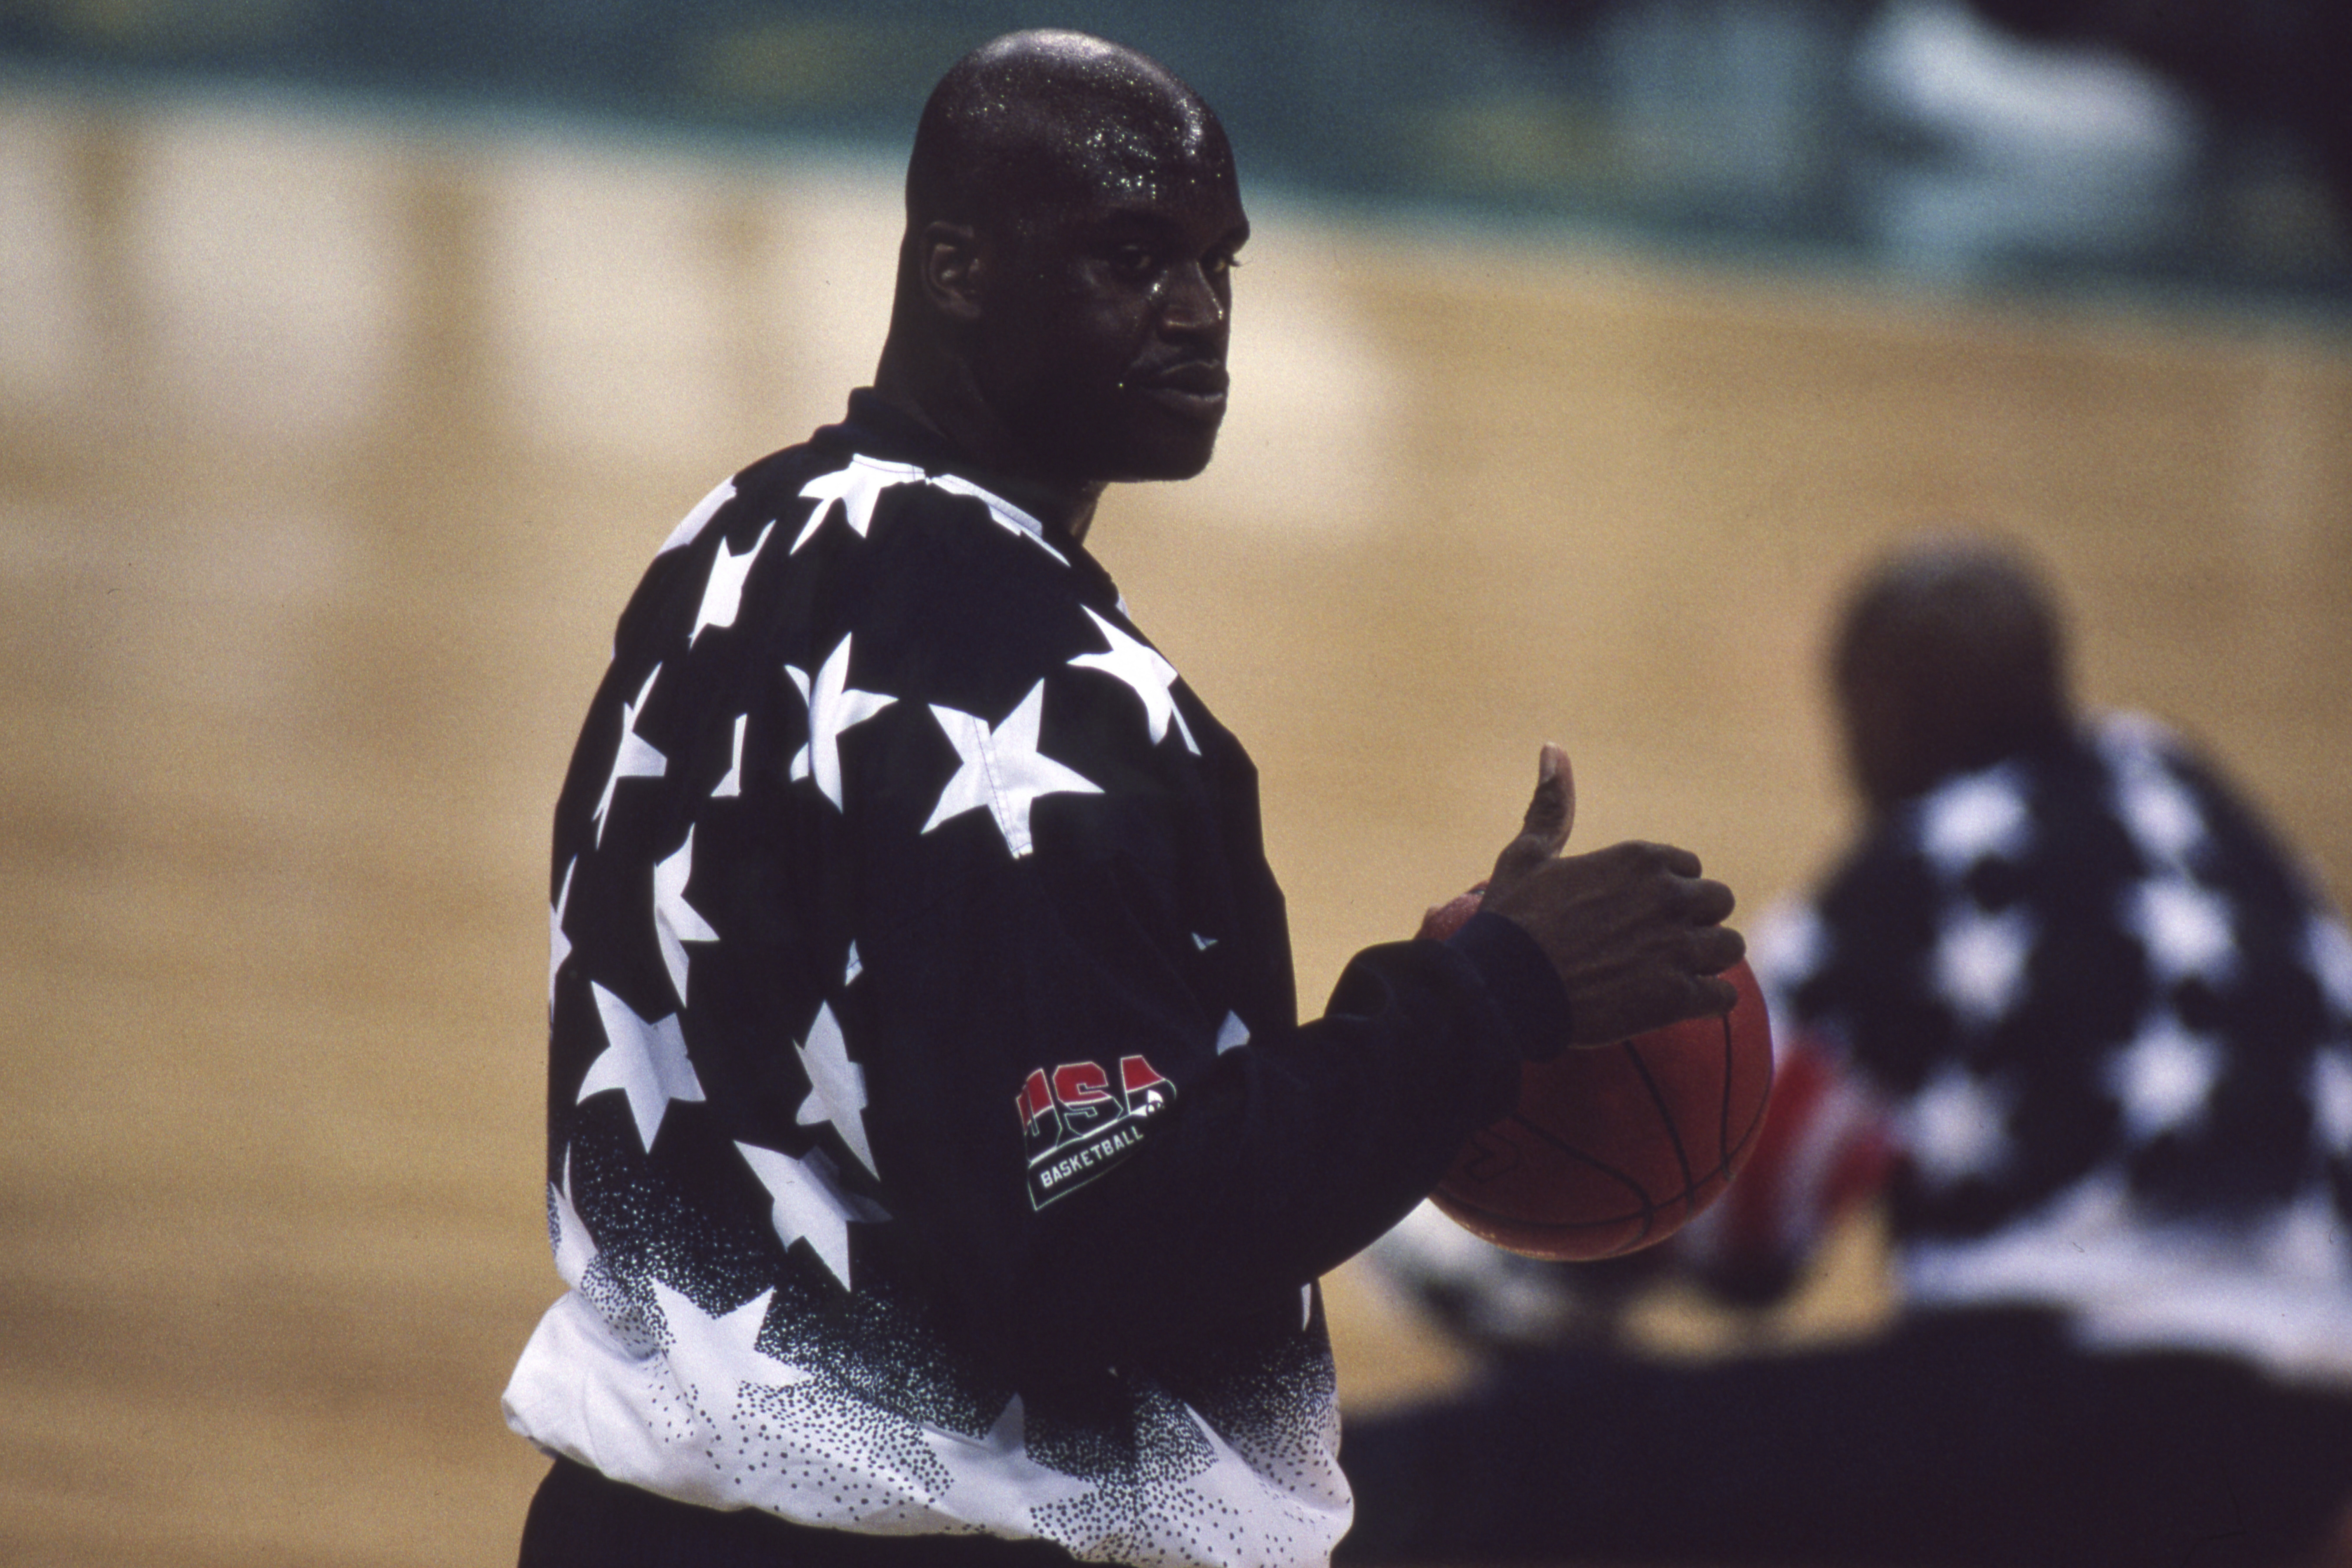 Former Boston Celtics big man Shaquille O’Neal on being inducted into the FIBA Hall of Fame